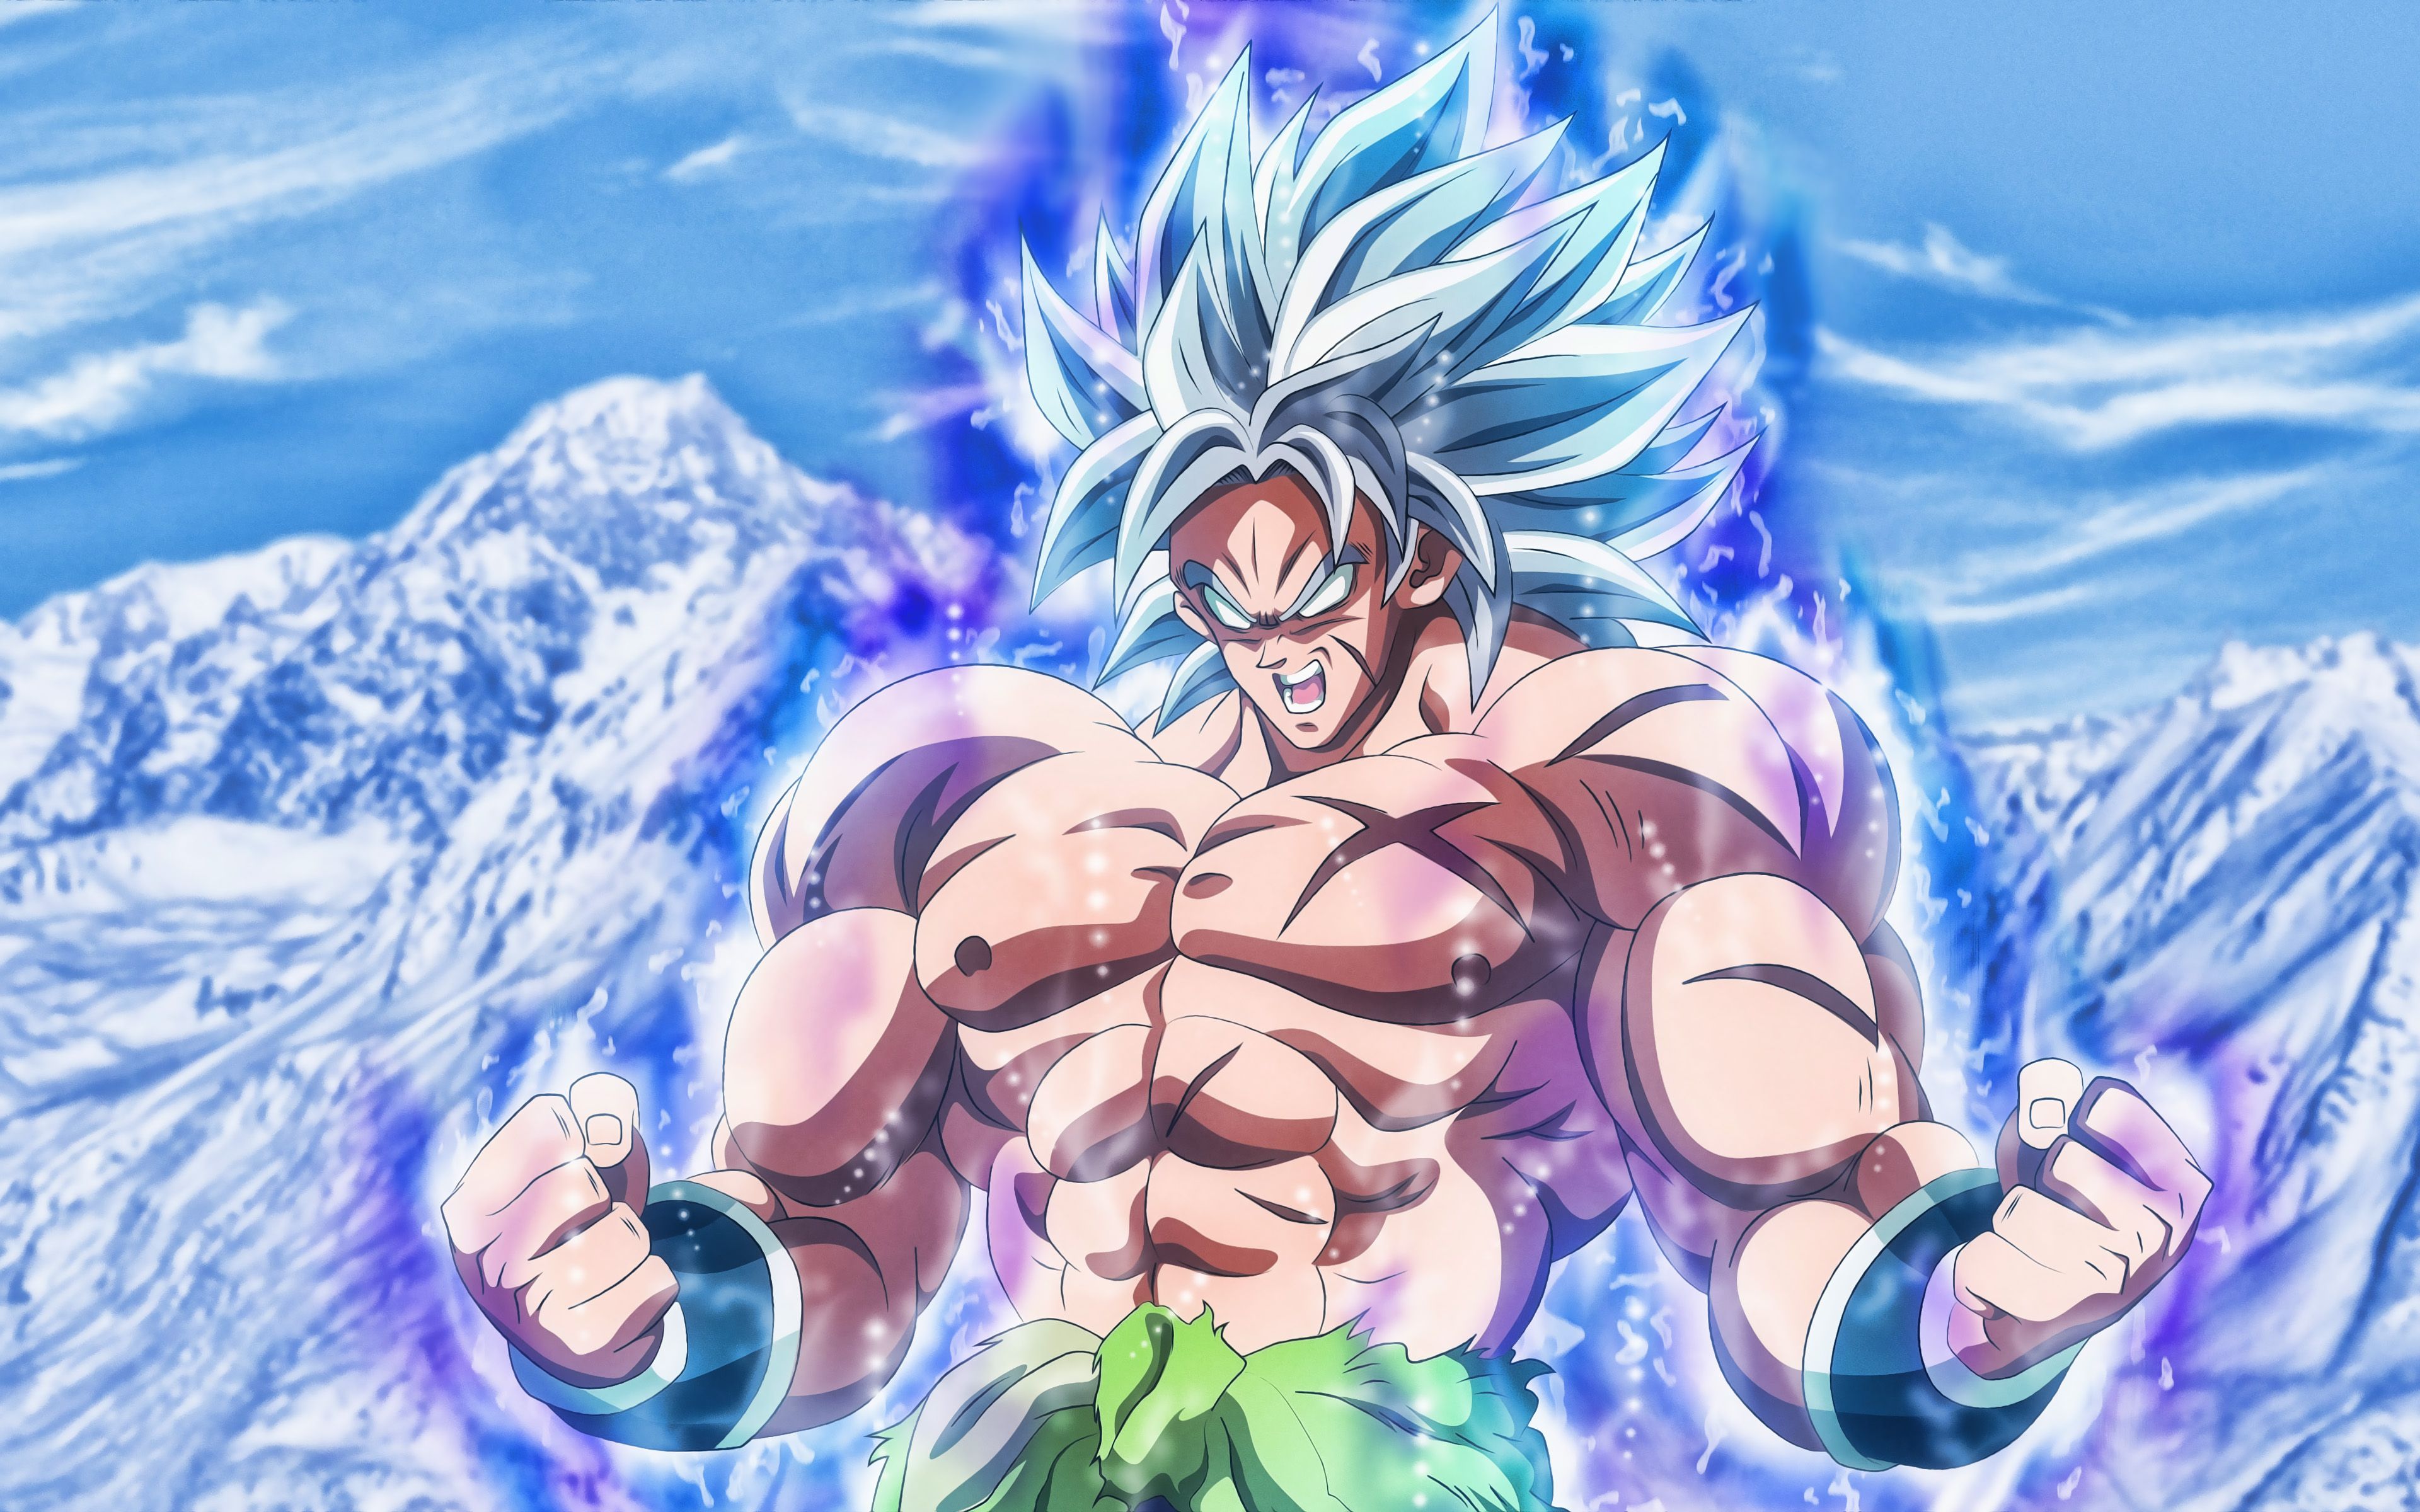 Download wallpaper Broly, 4k, mountains, Dragon Ball, artwork, DBS, Dragon Ball Super, DBS characters, Broly 4k for desktop with resolution 3840x2400. High Quality HD picture wallpaper